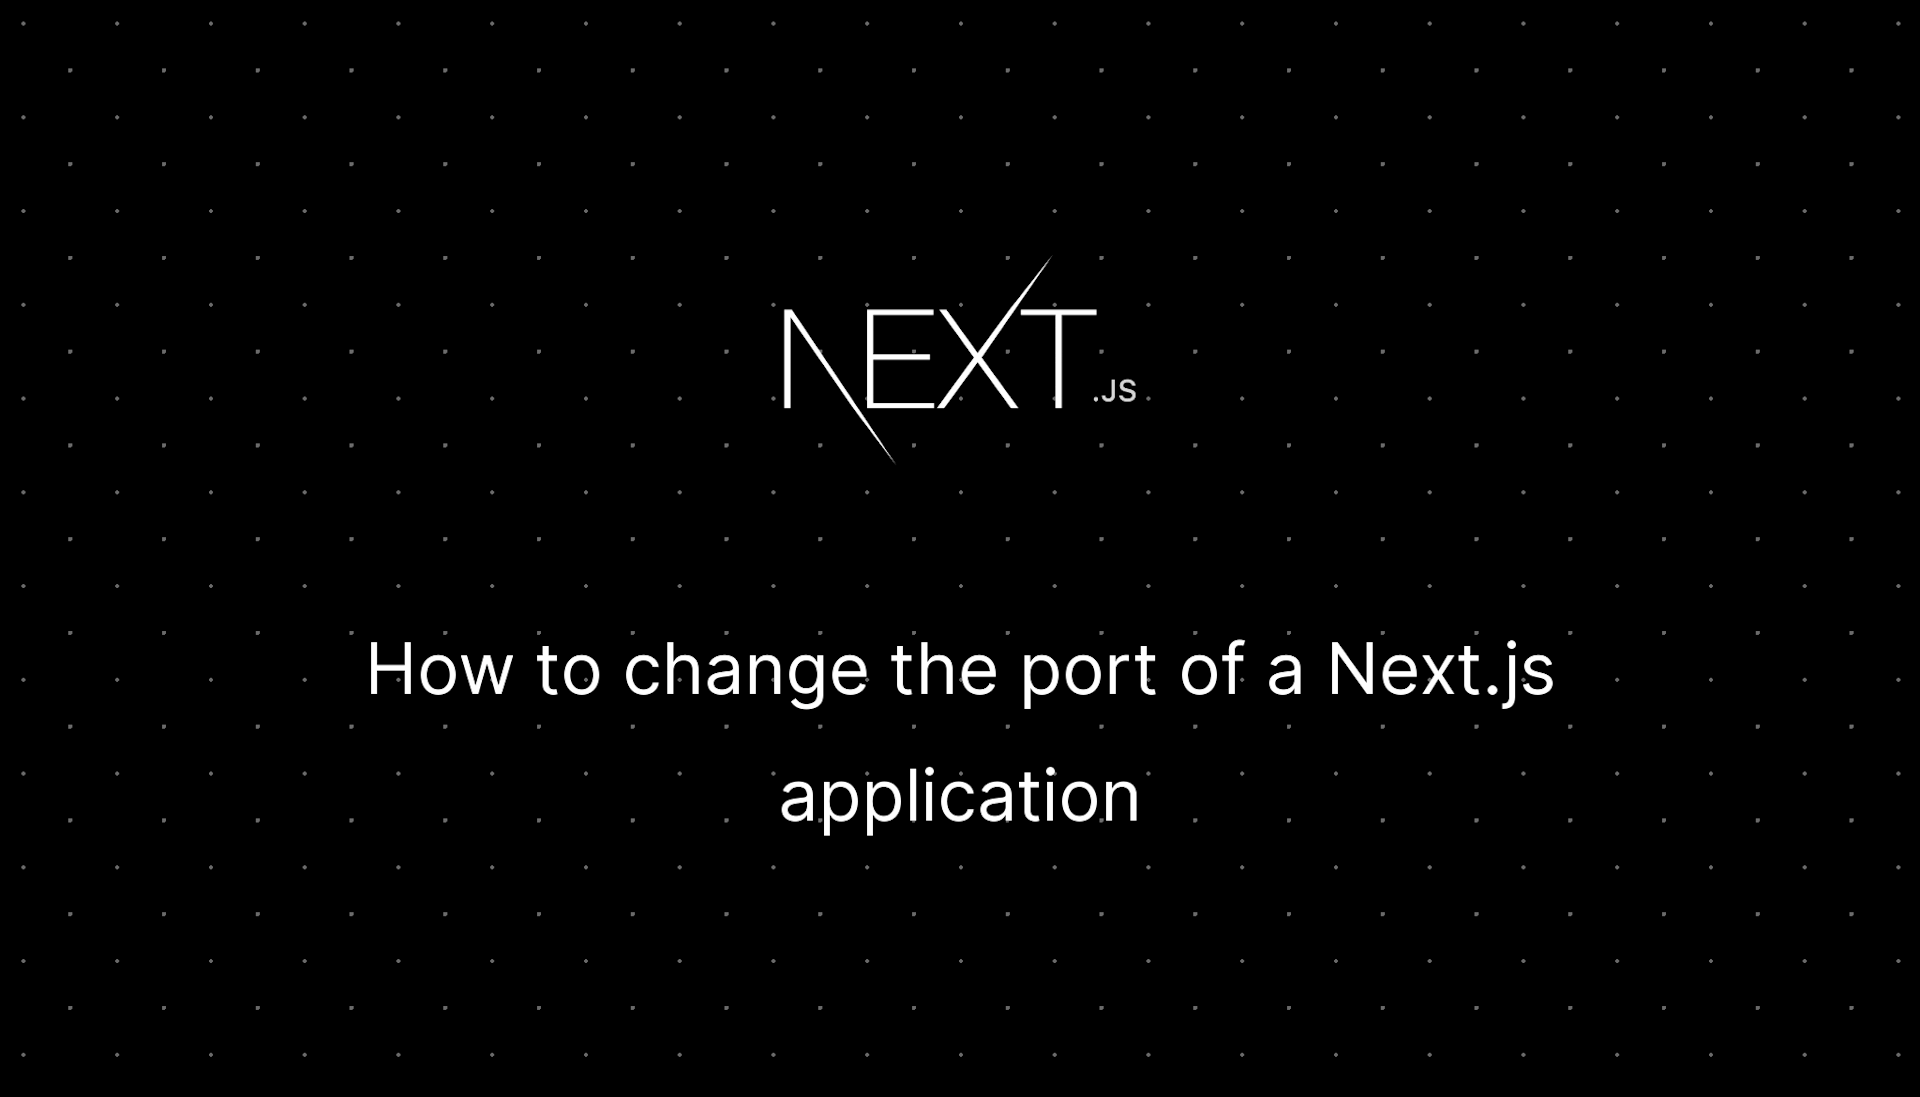 How to change the port of a Next.js application